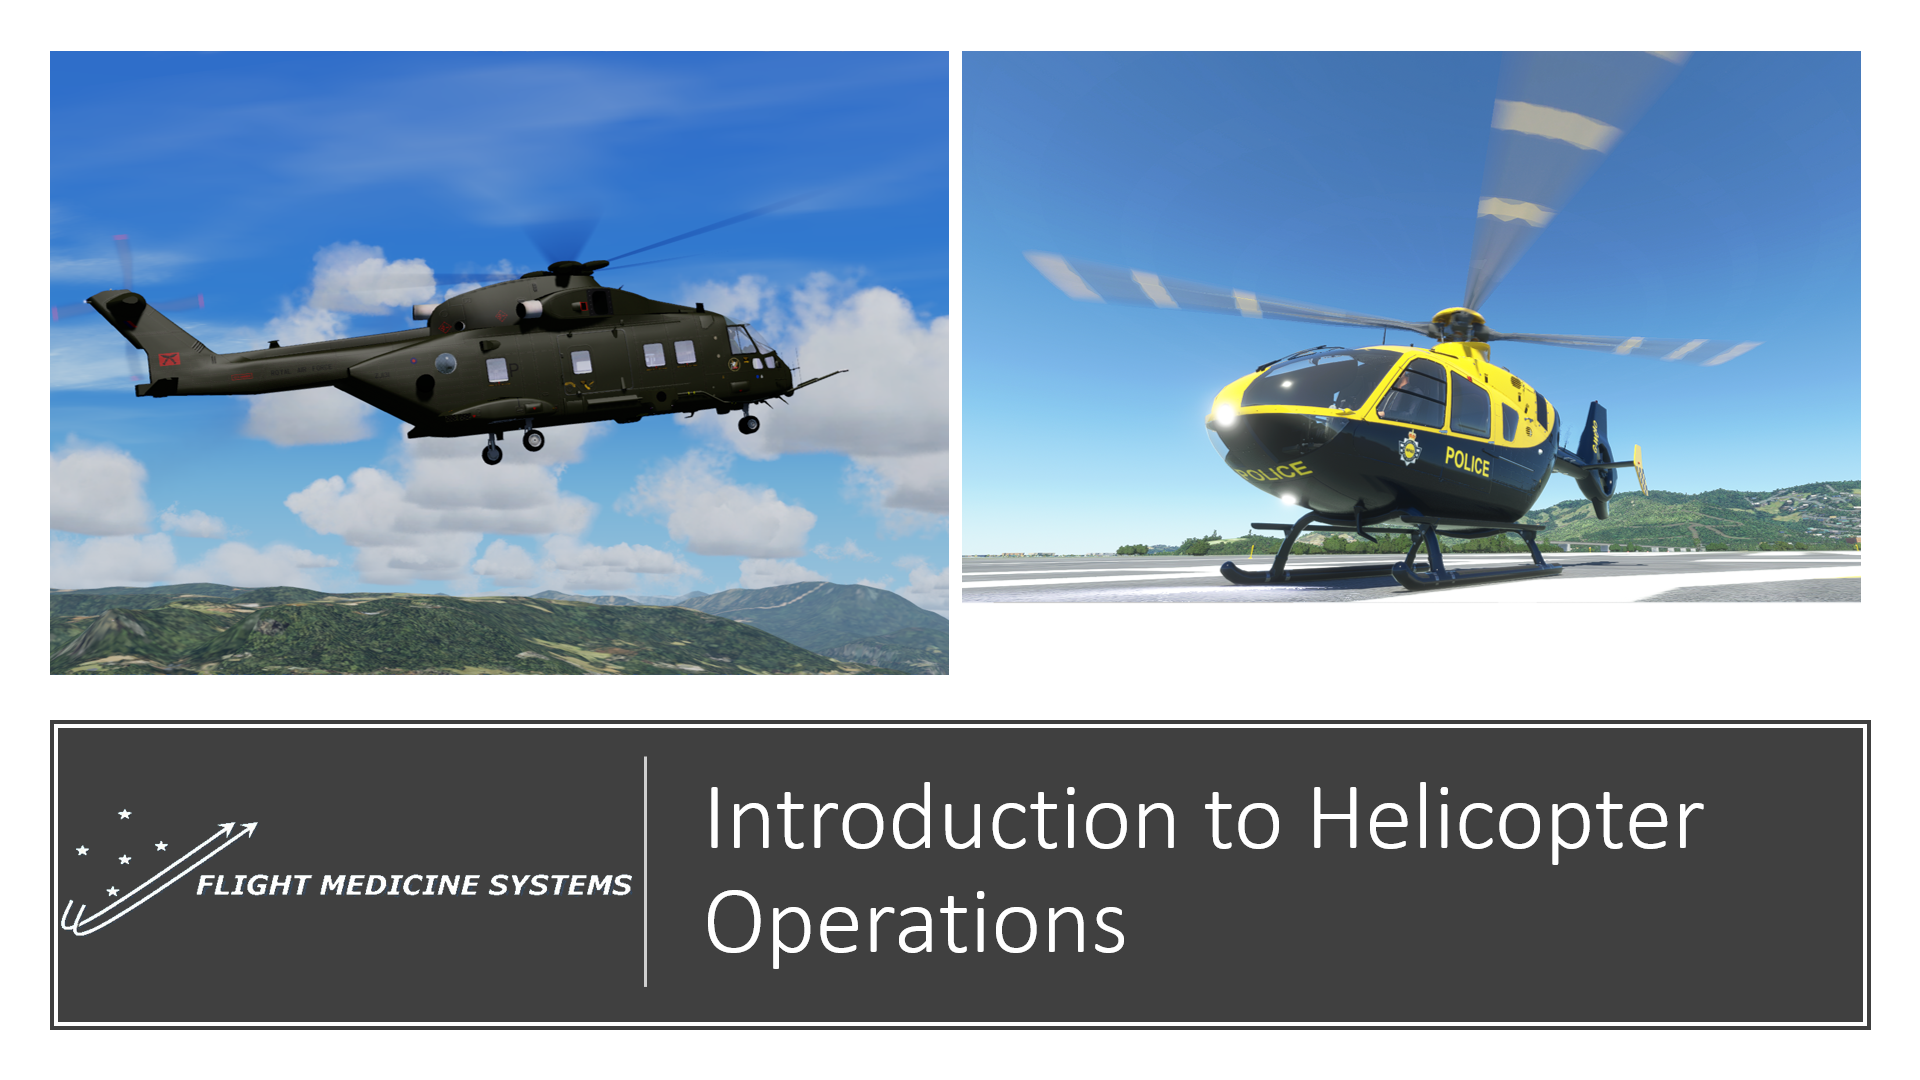 Introduction to Helicopter Operations